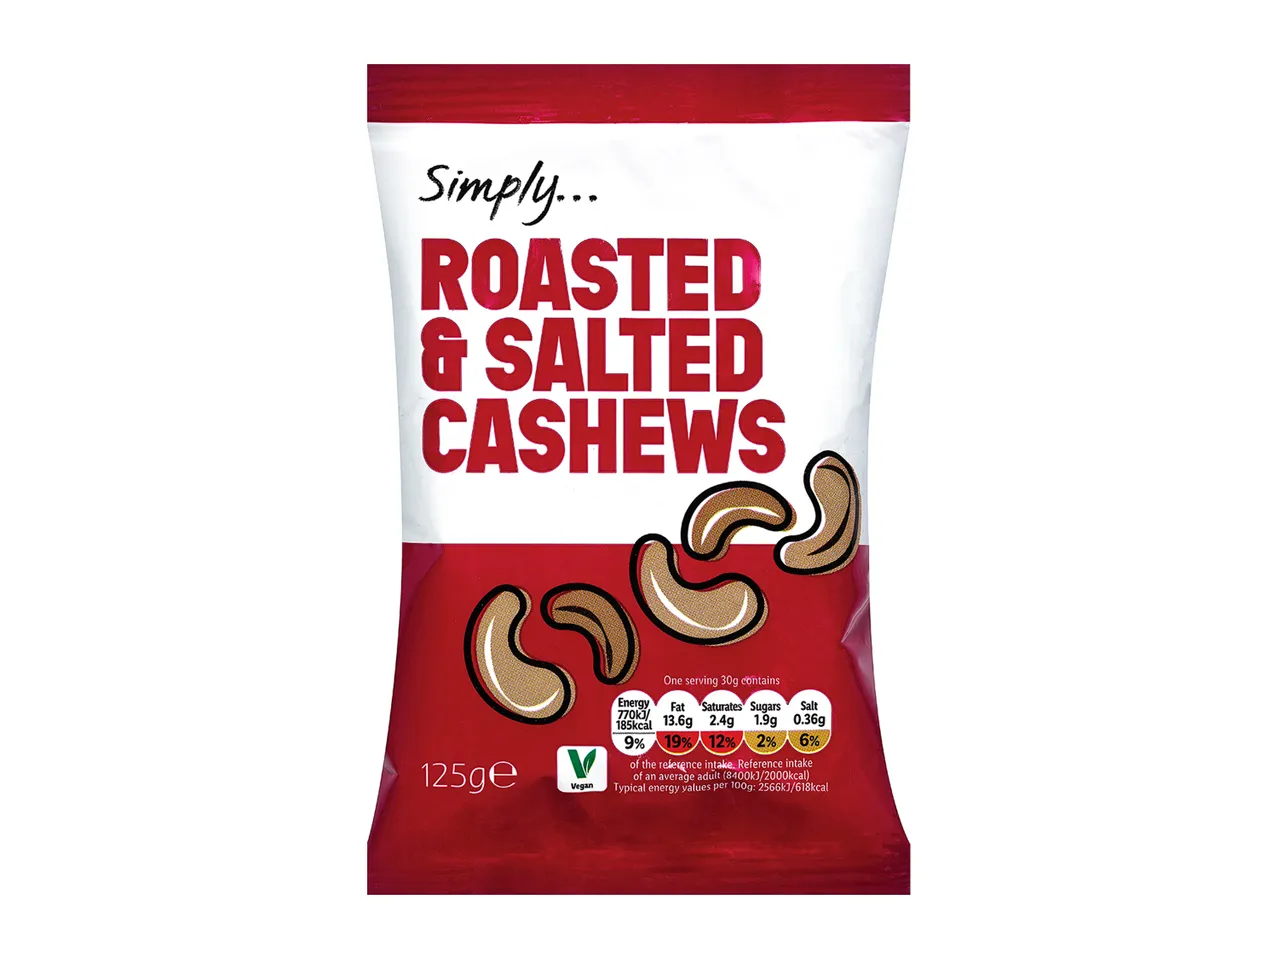 Go to full screen view: Simply Roasted & Salted Cashews - Image 1